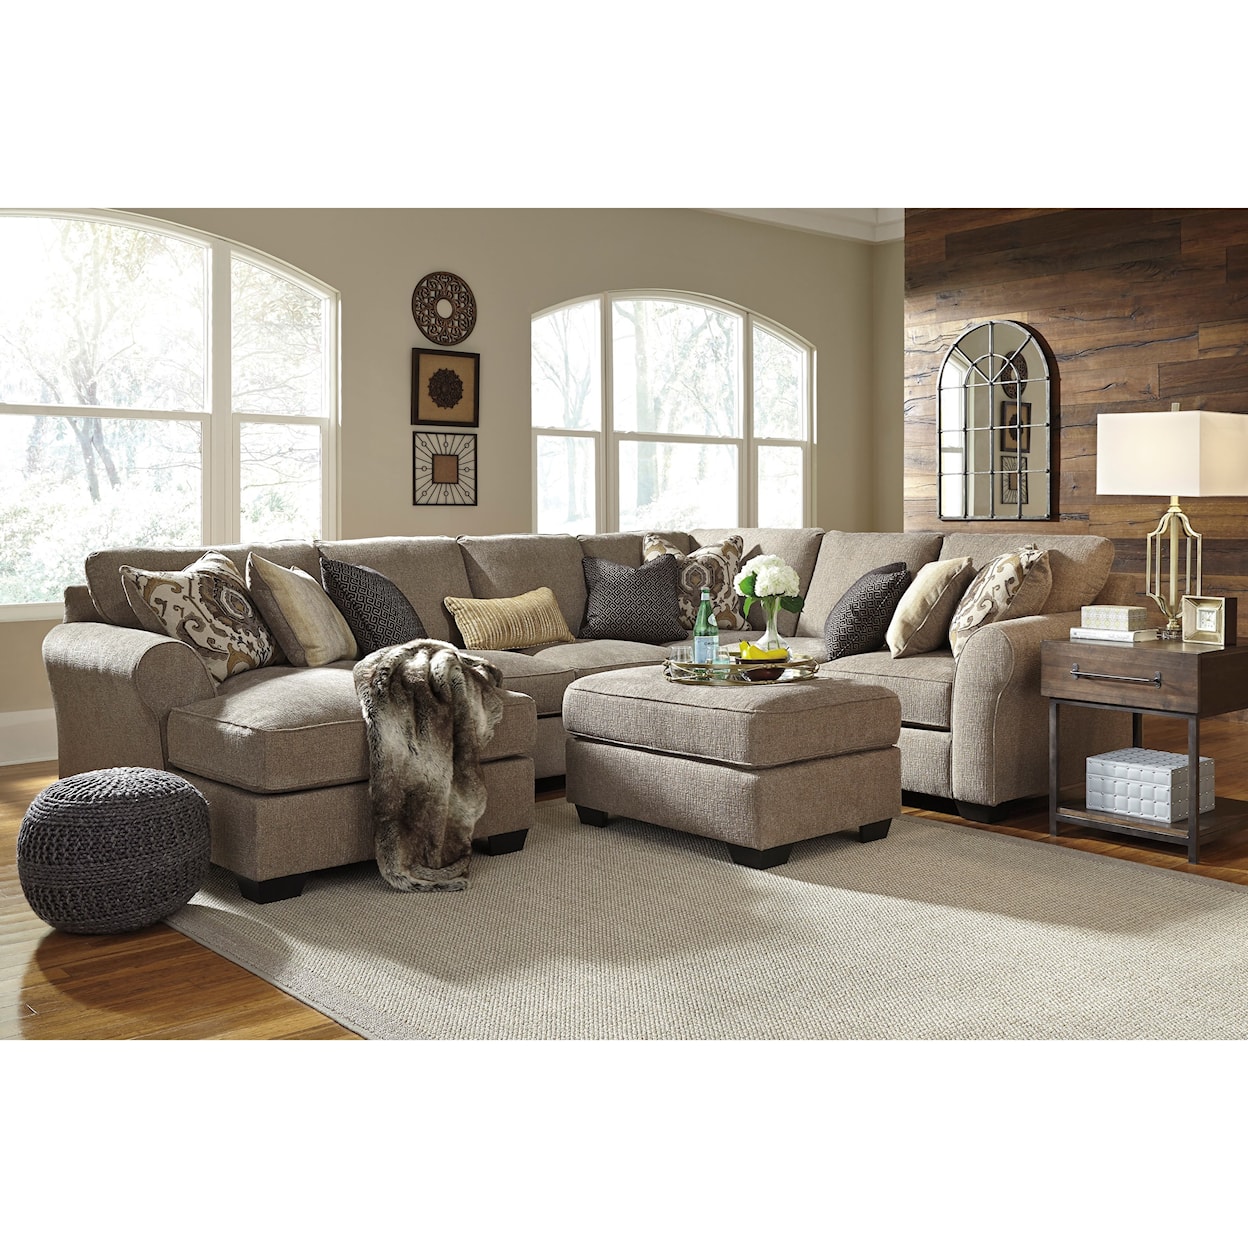 Benchcraft Pantomine 4-Piece Sectional with Ottoman